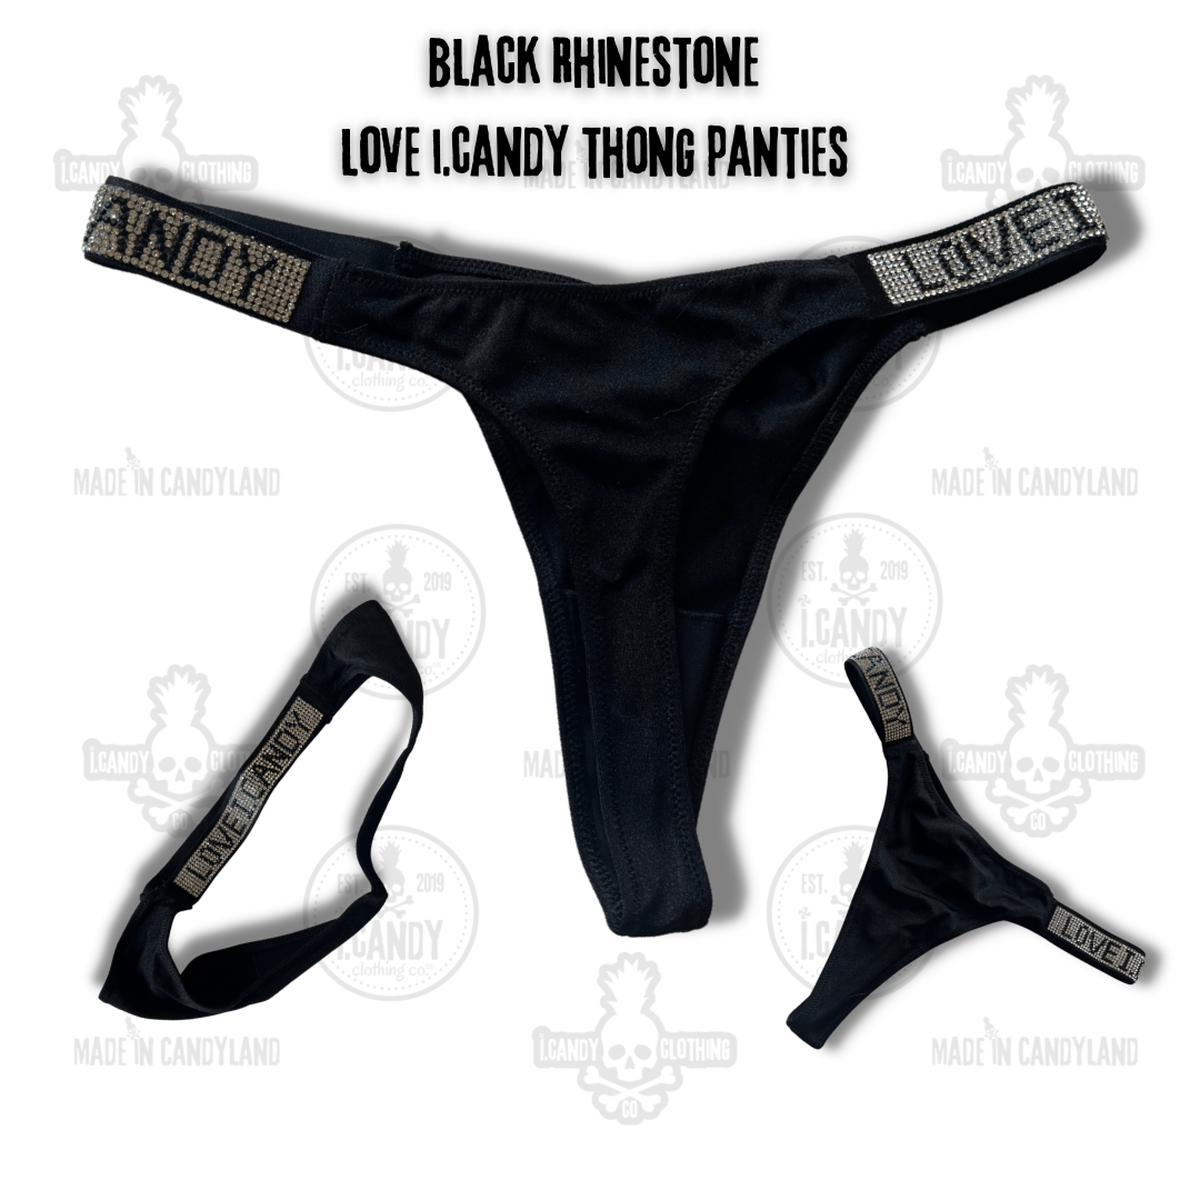 https://icandymerch.com/files/products/black-rhinestone-love-i-candy-panties-1.png